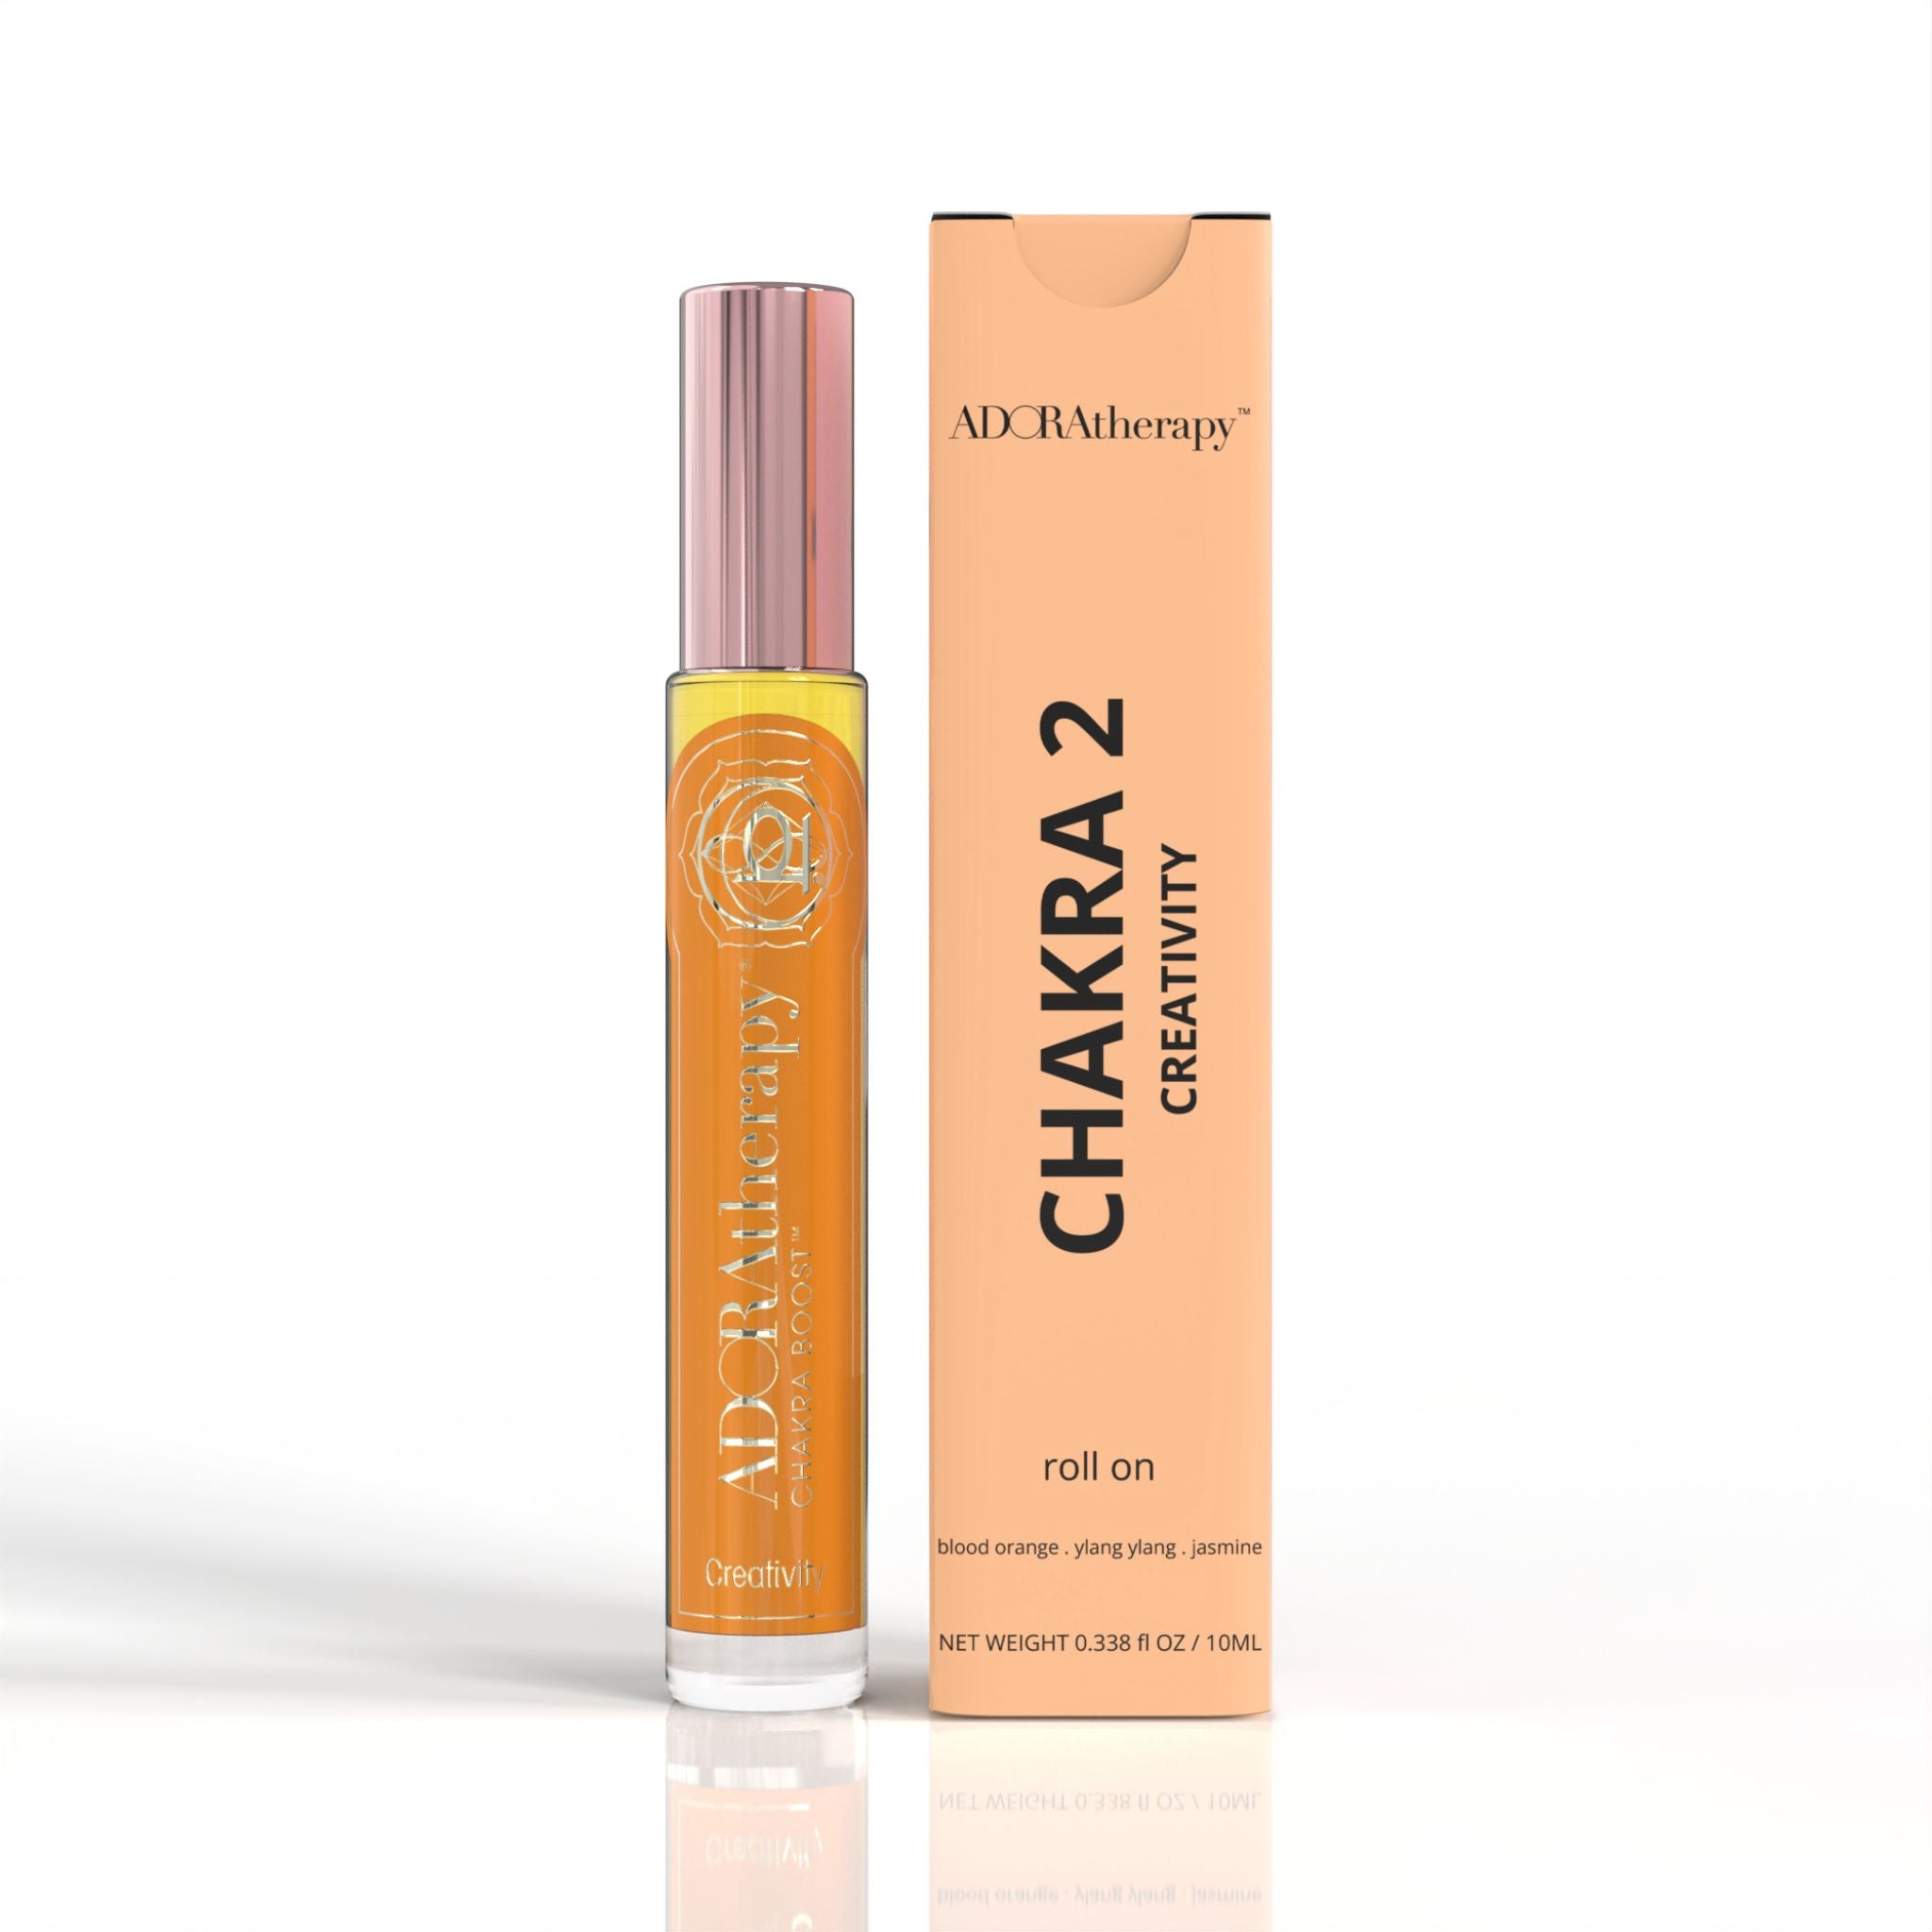 Chakra 2 Creativity Roll  On Perfume  Oil by ADORAtherapy